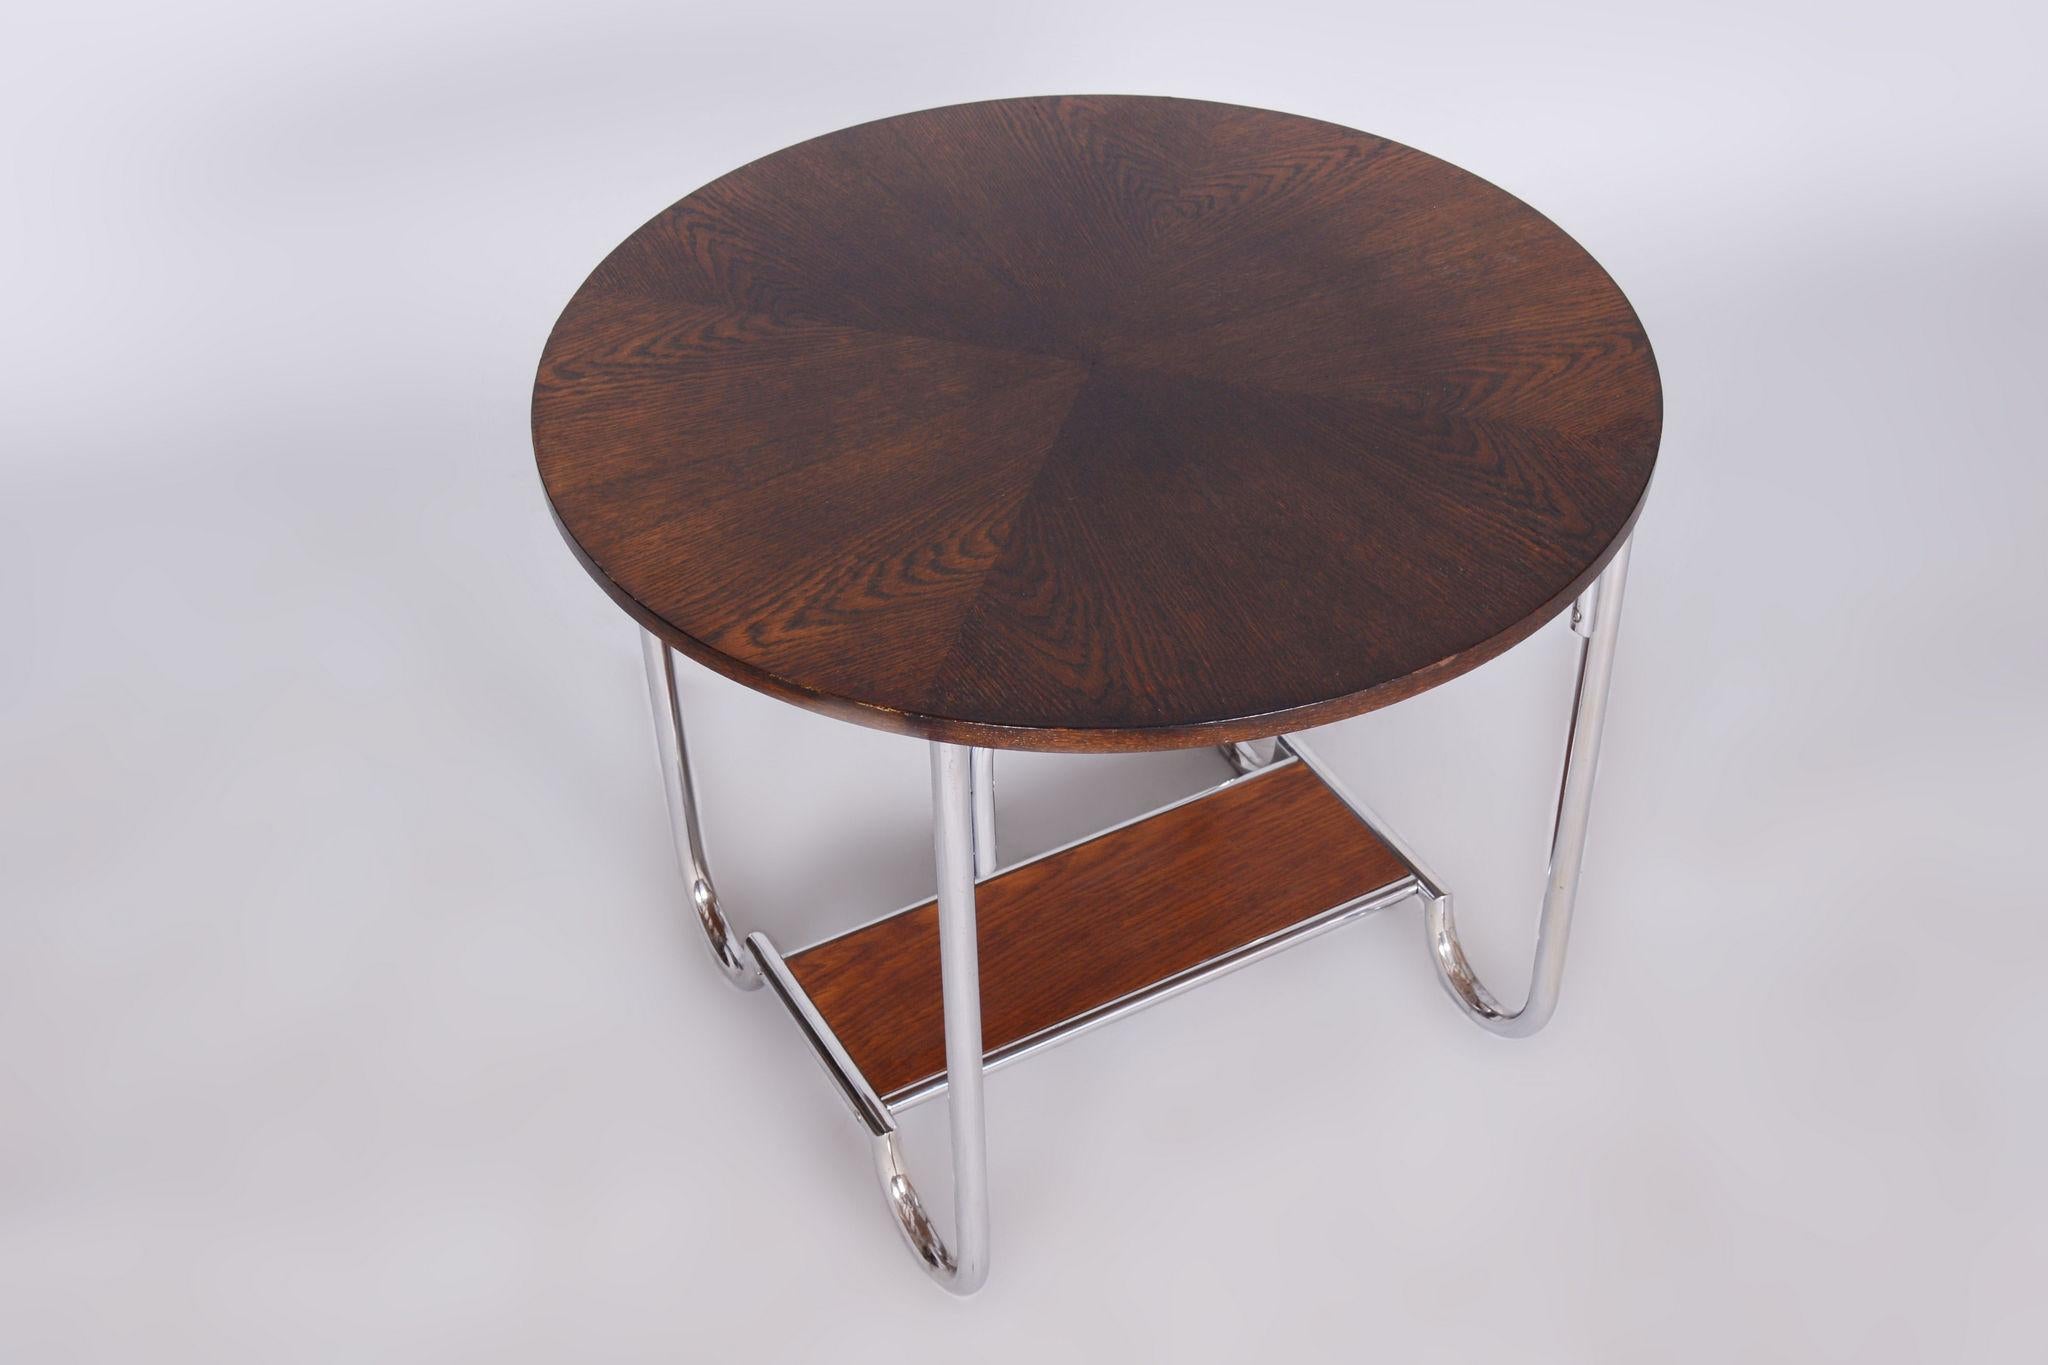 Restored Bauhaus Oak Small Round Table, Chrome-Plated Steel, Czechia, 1930s For Sale 3